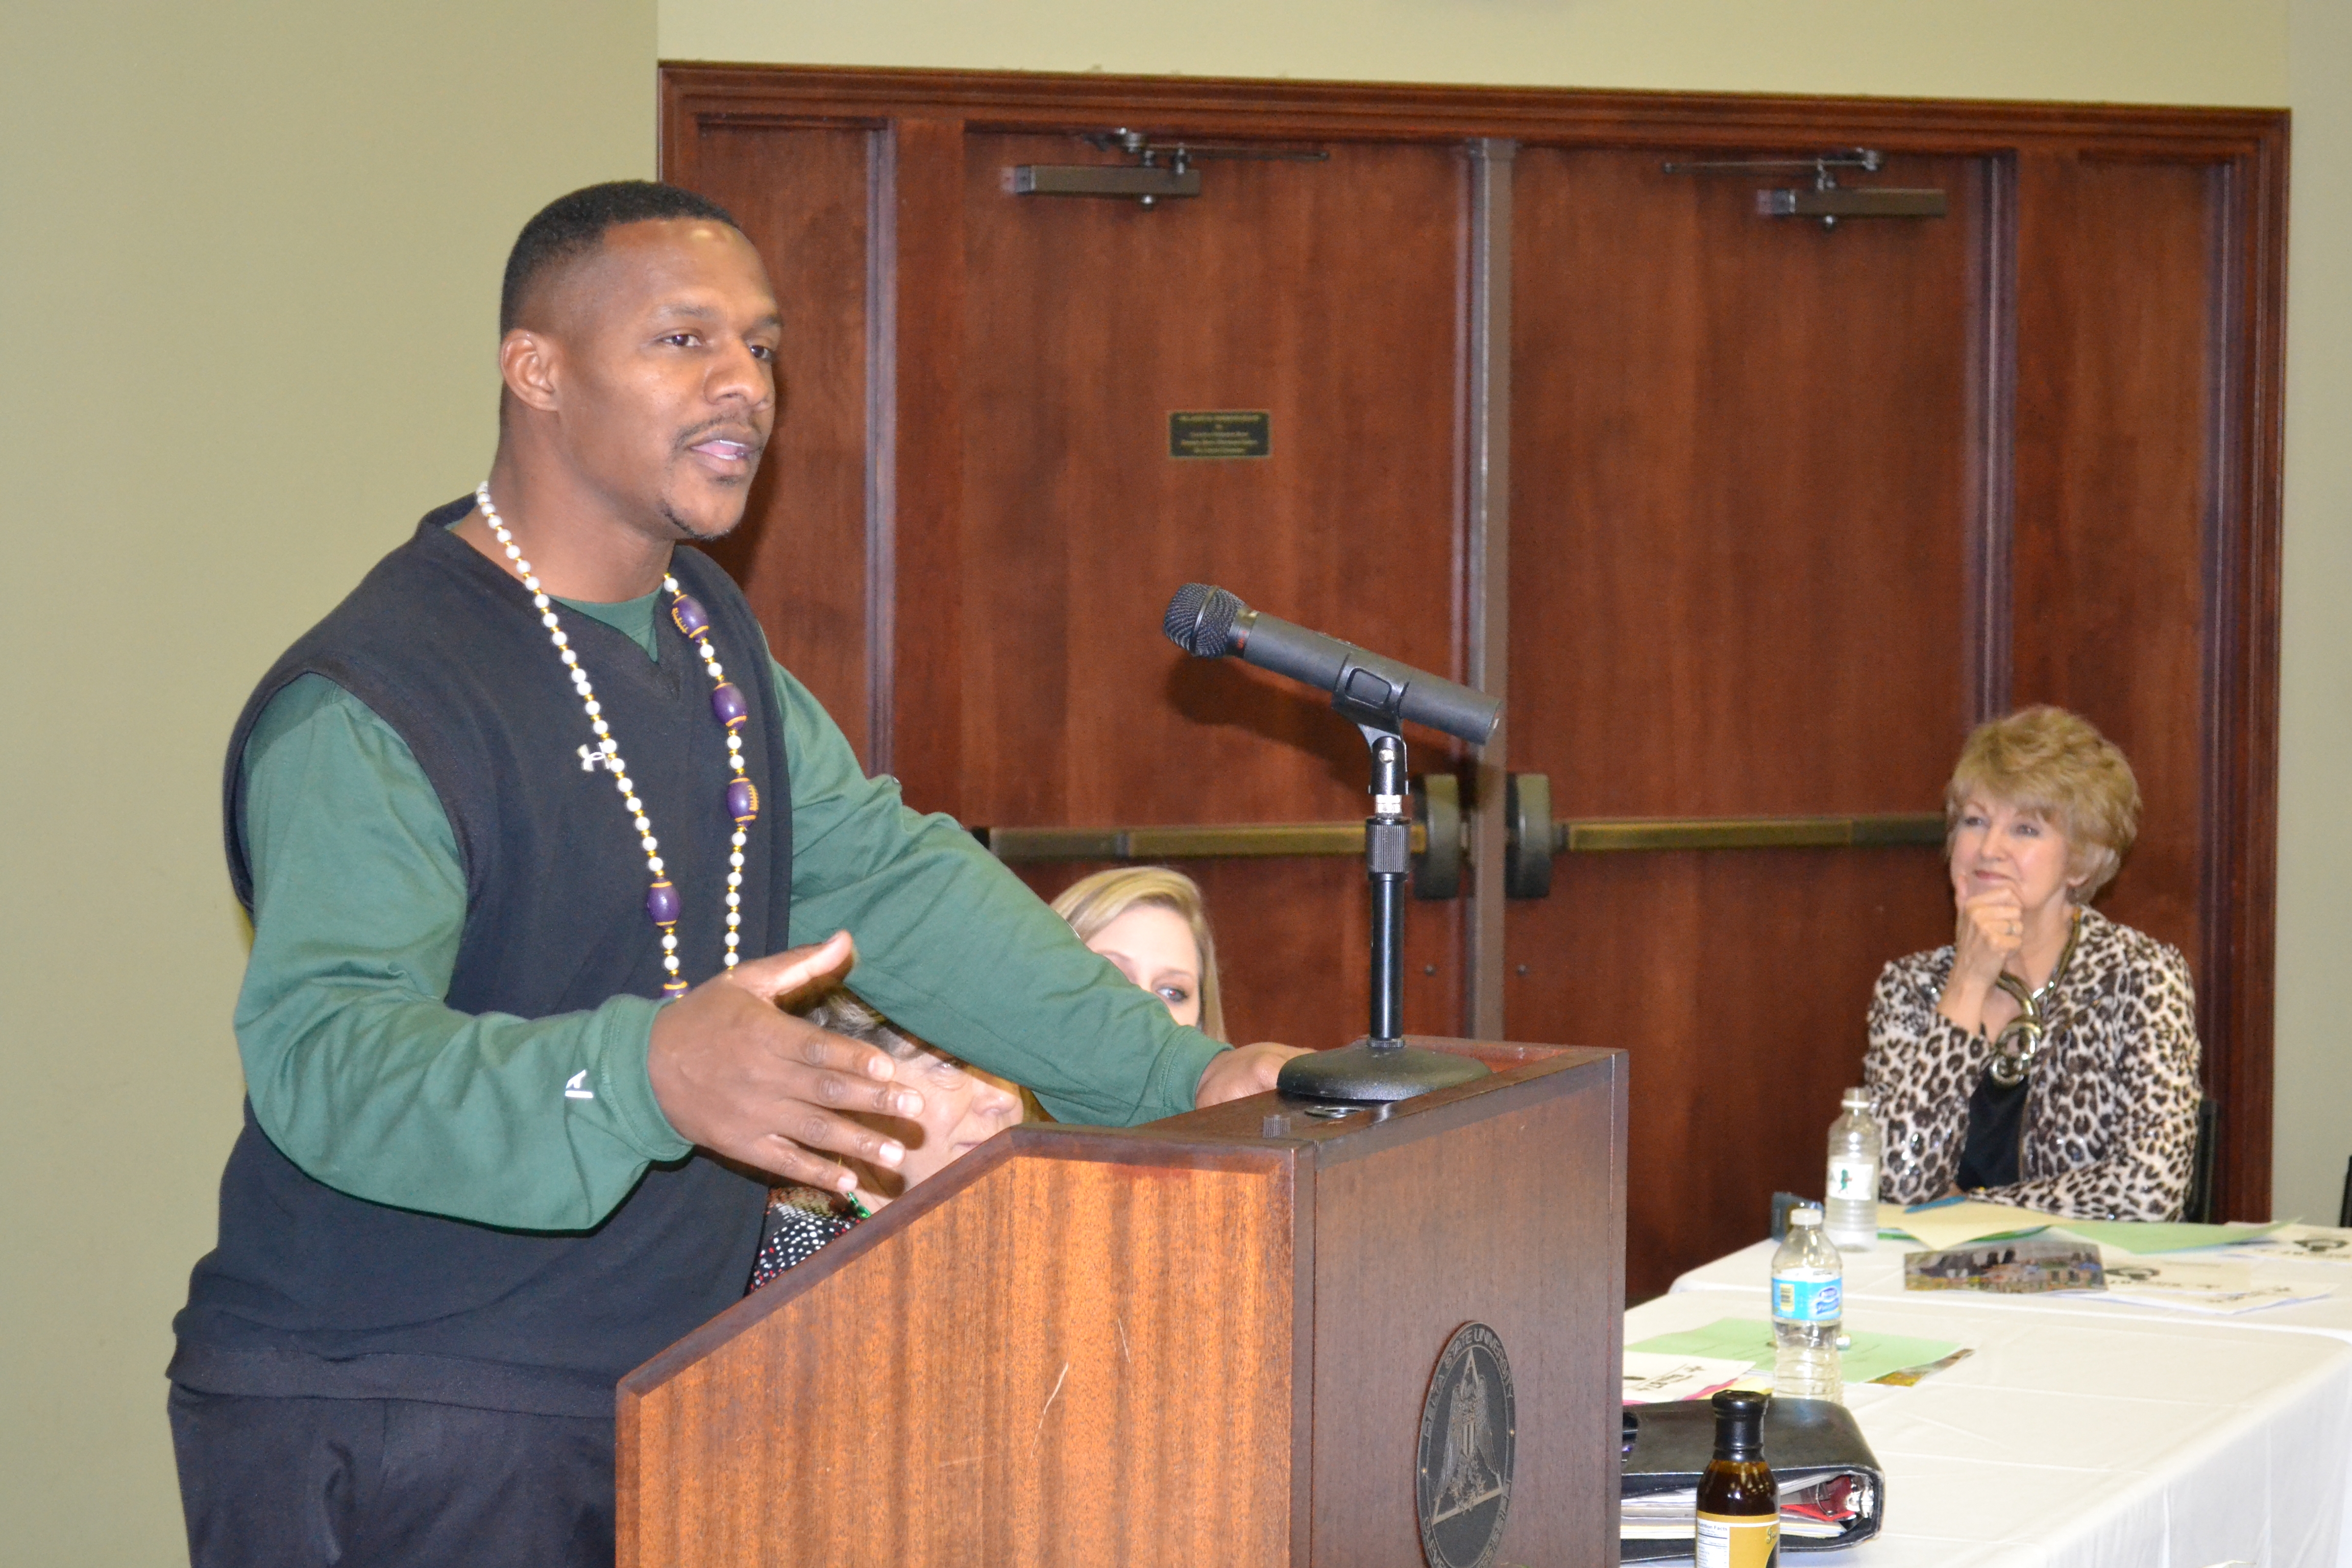 PHOTO:  Former New Orleans Saints wide receiver Joe Horn speaks during a round table discussion on raising money for scholarships hosted by the Delta State University Alumni and Foundation as Delta State’s Director of Donor Relations Ann Giger looks on. 